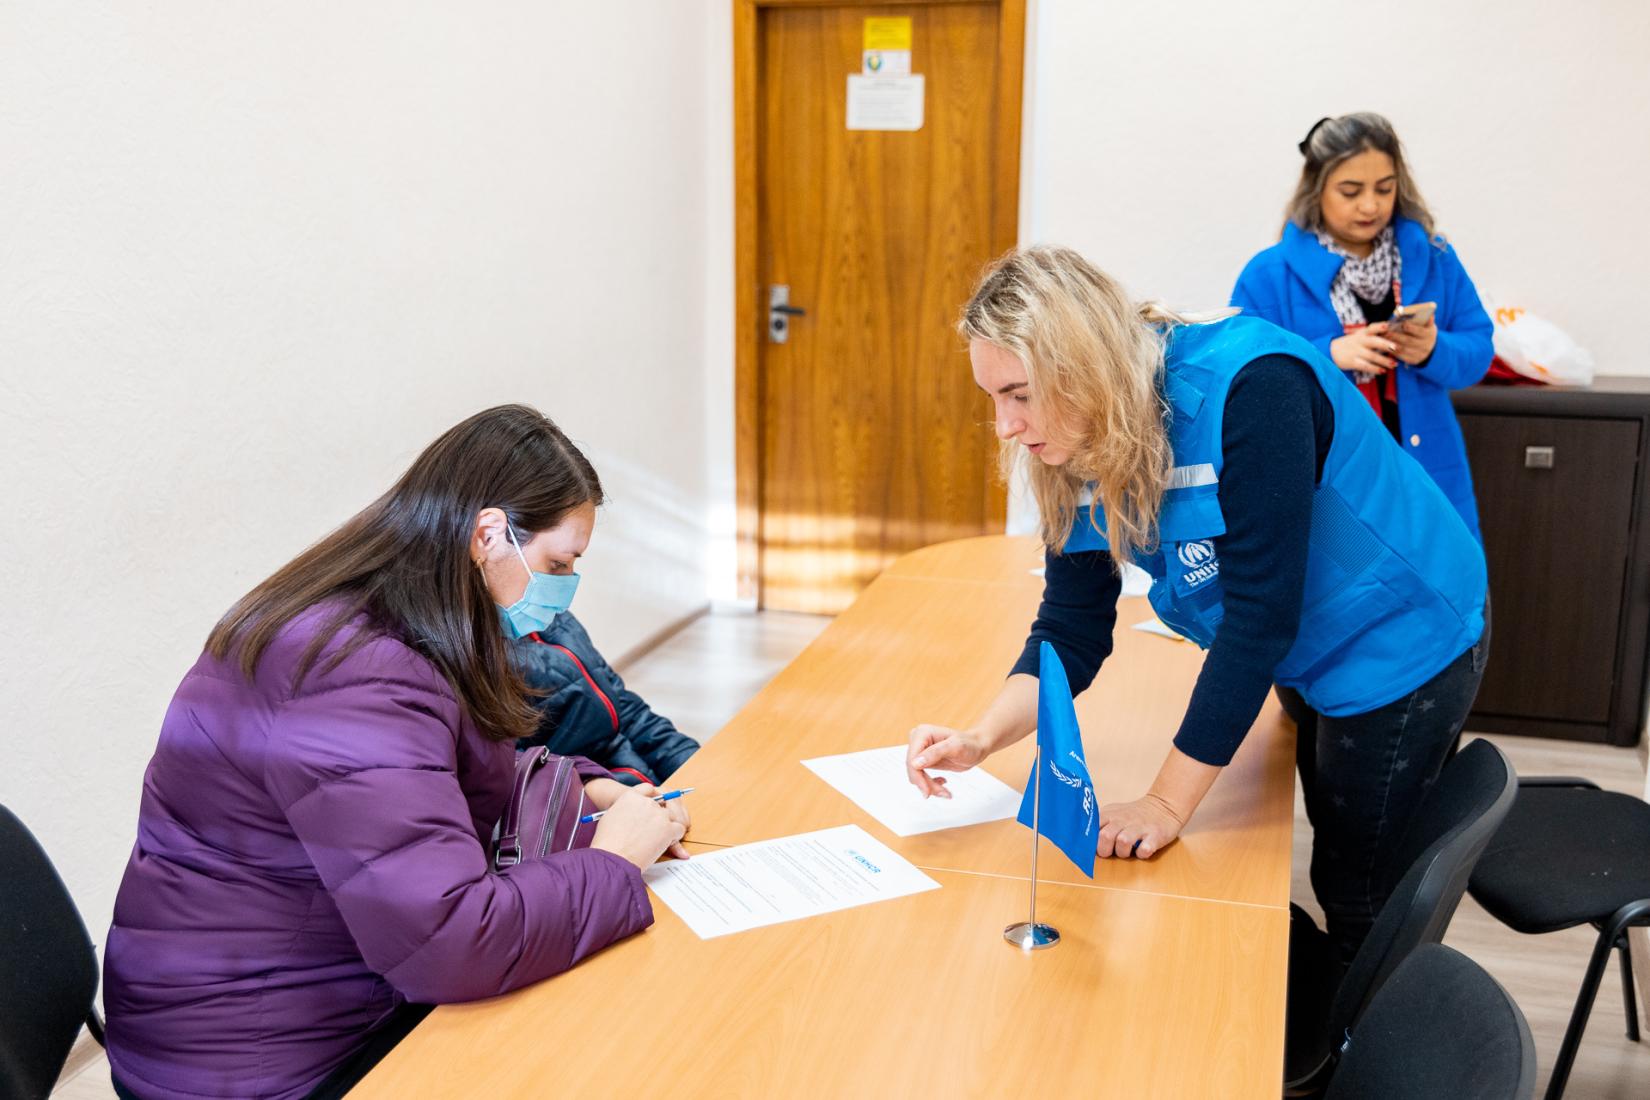 UNICEF and UNHCR assist with psychological support and the provision of targeted cash assistance, as well as voucher assistance to purchase basic necessities